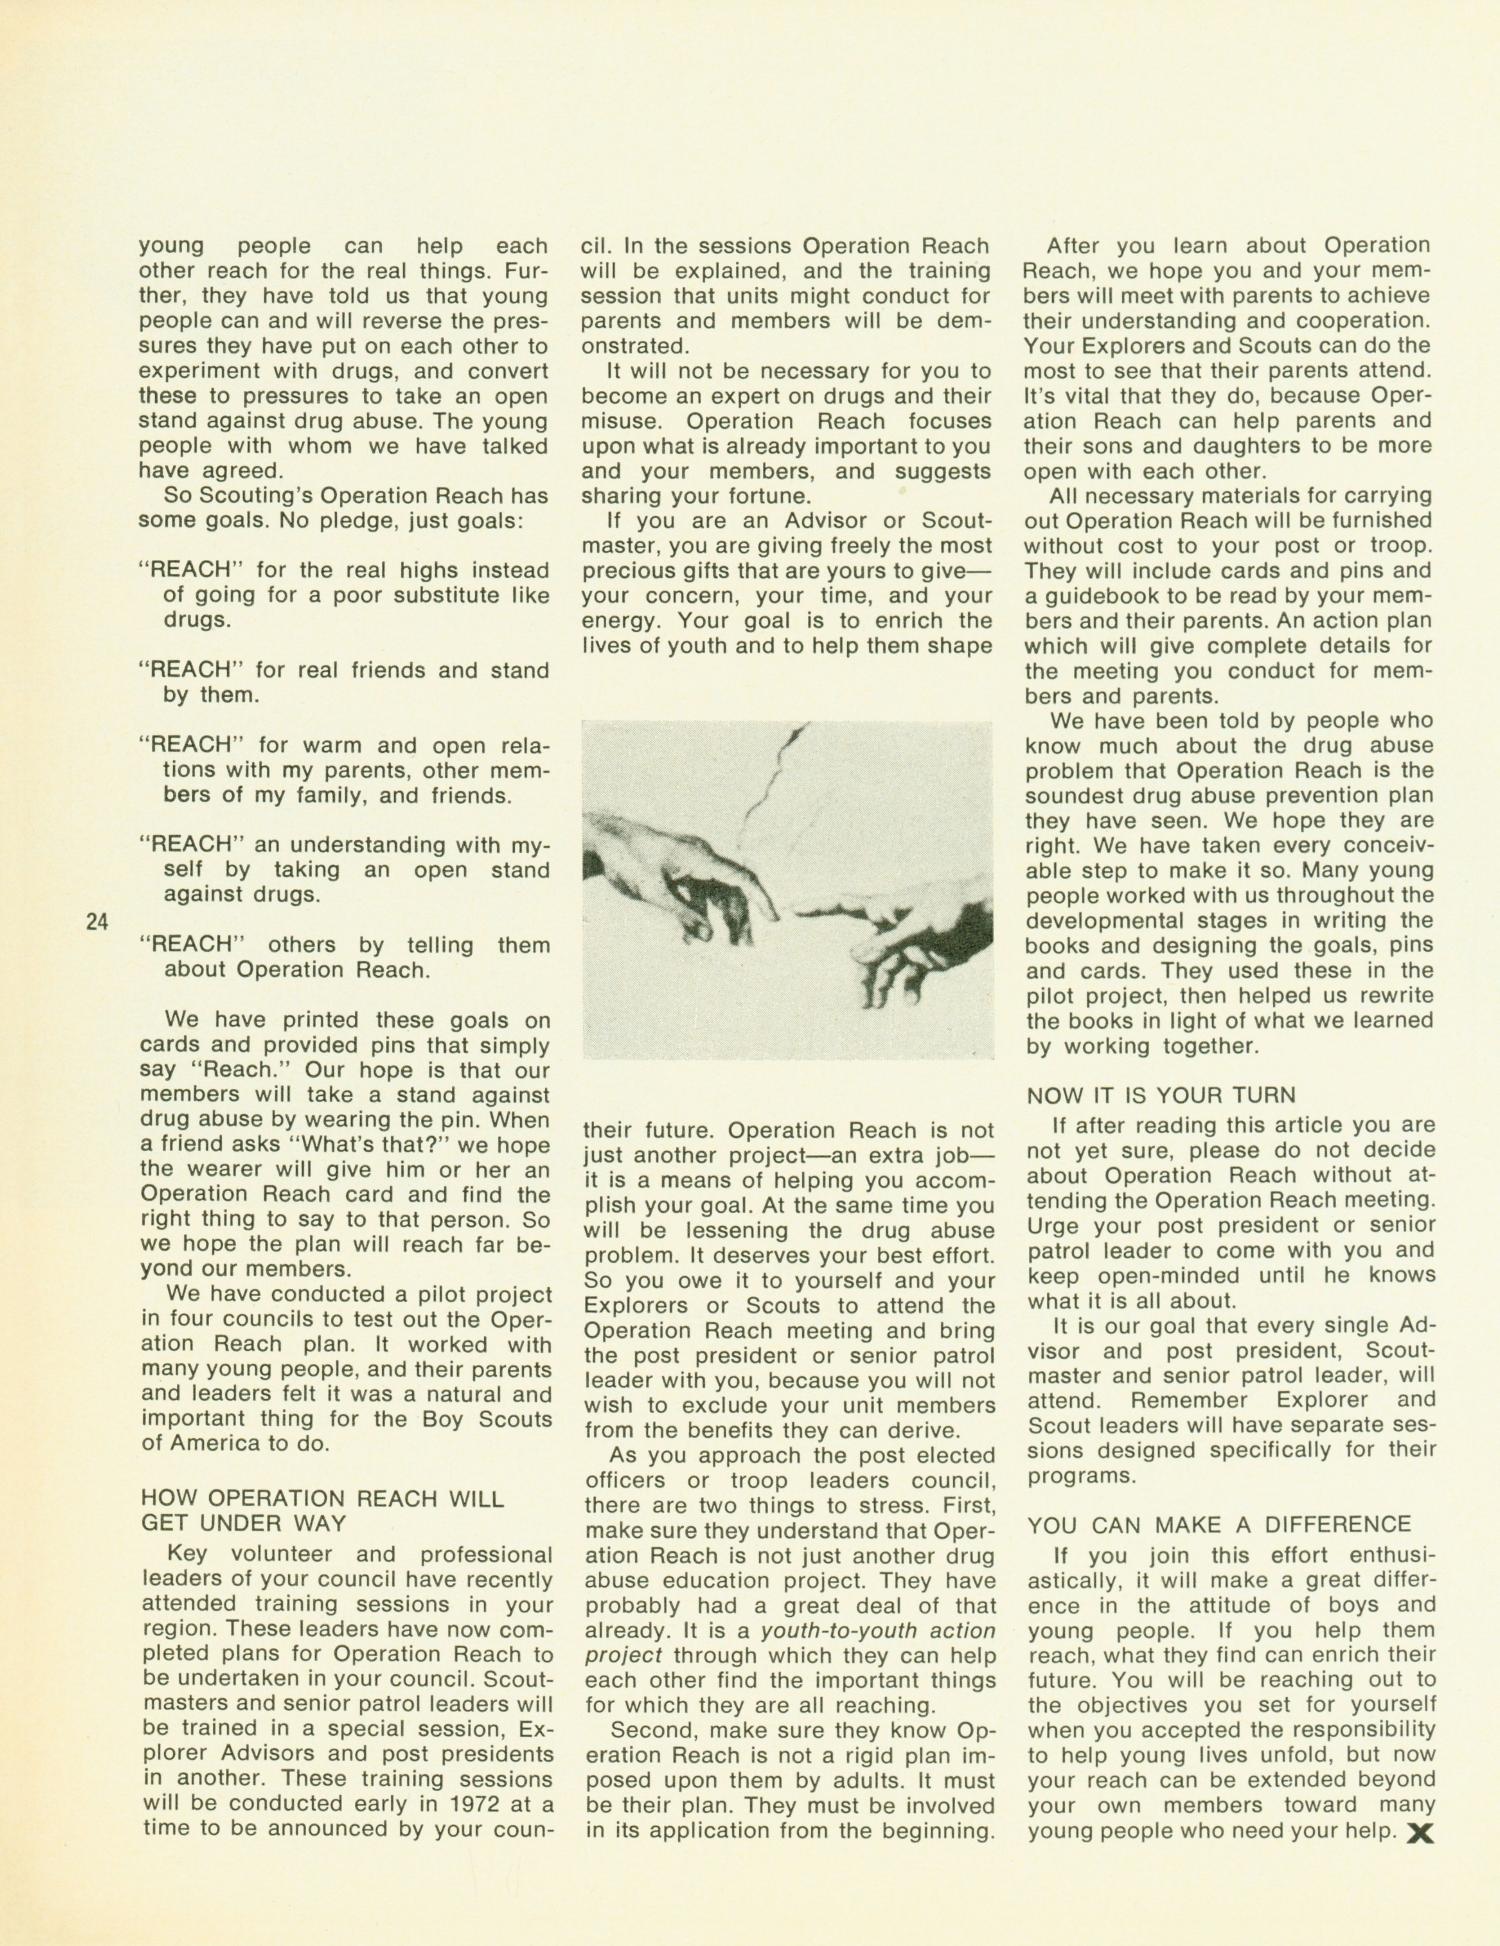 Scouting, Volume 60, Number 1, January-February 1972
                                                
                                                    24
                                                